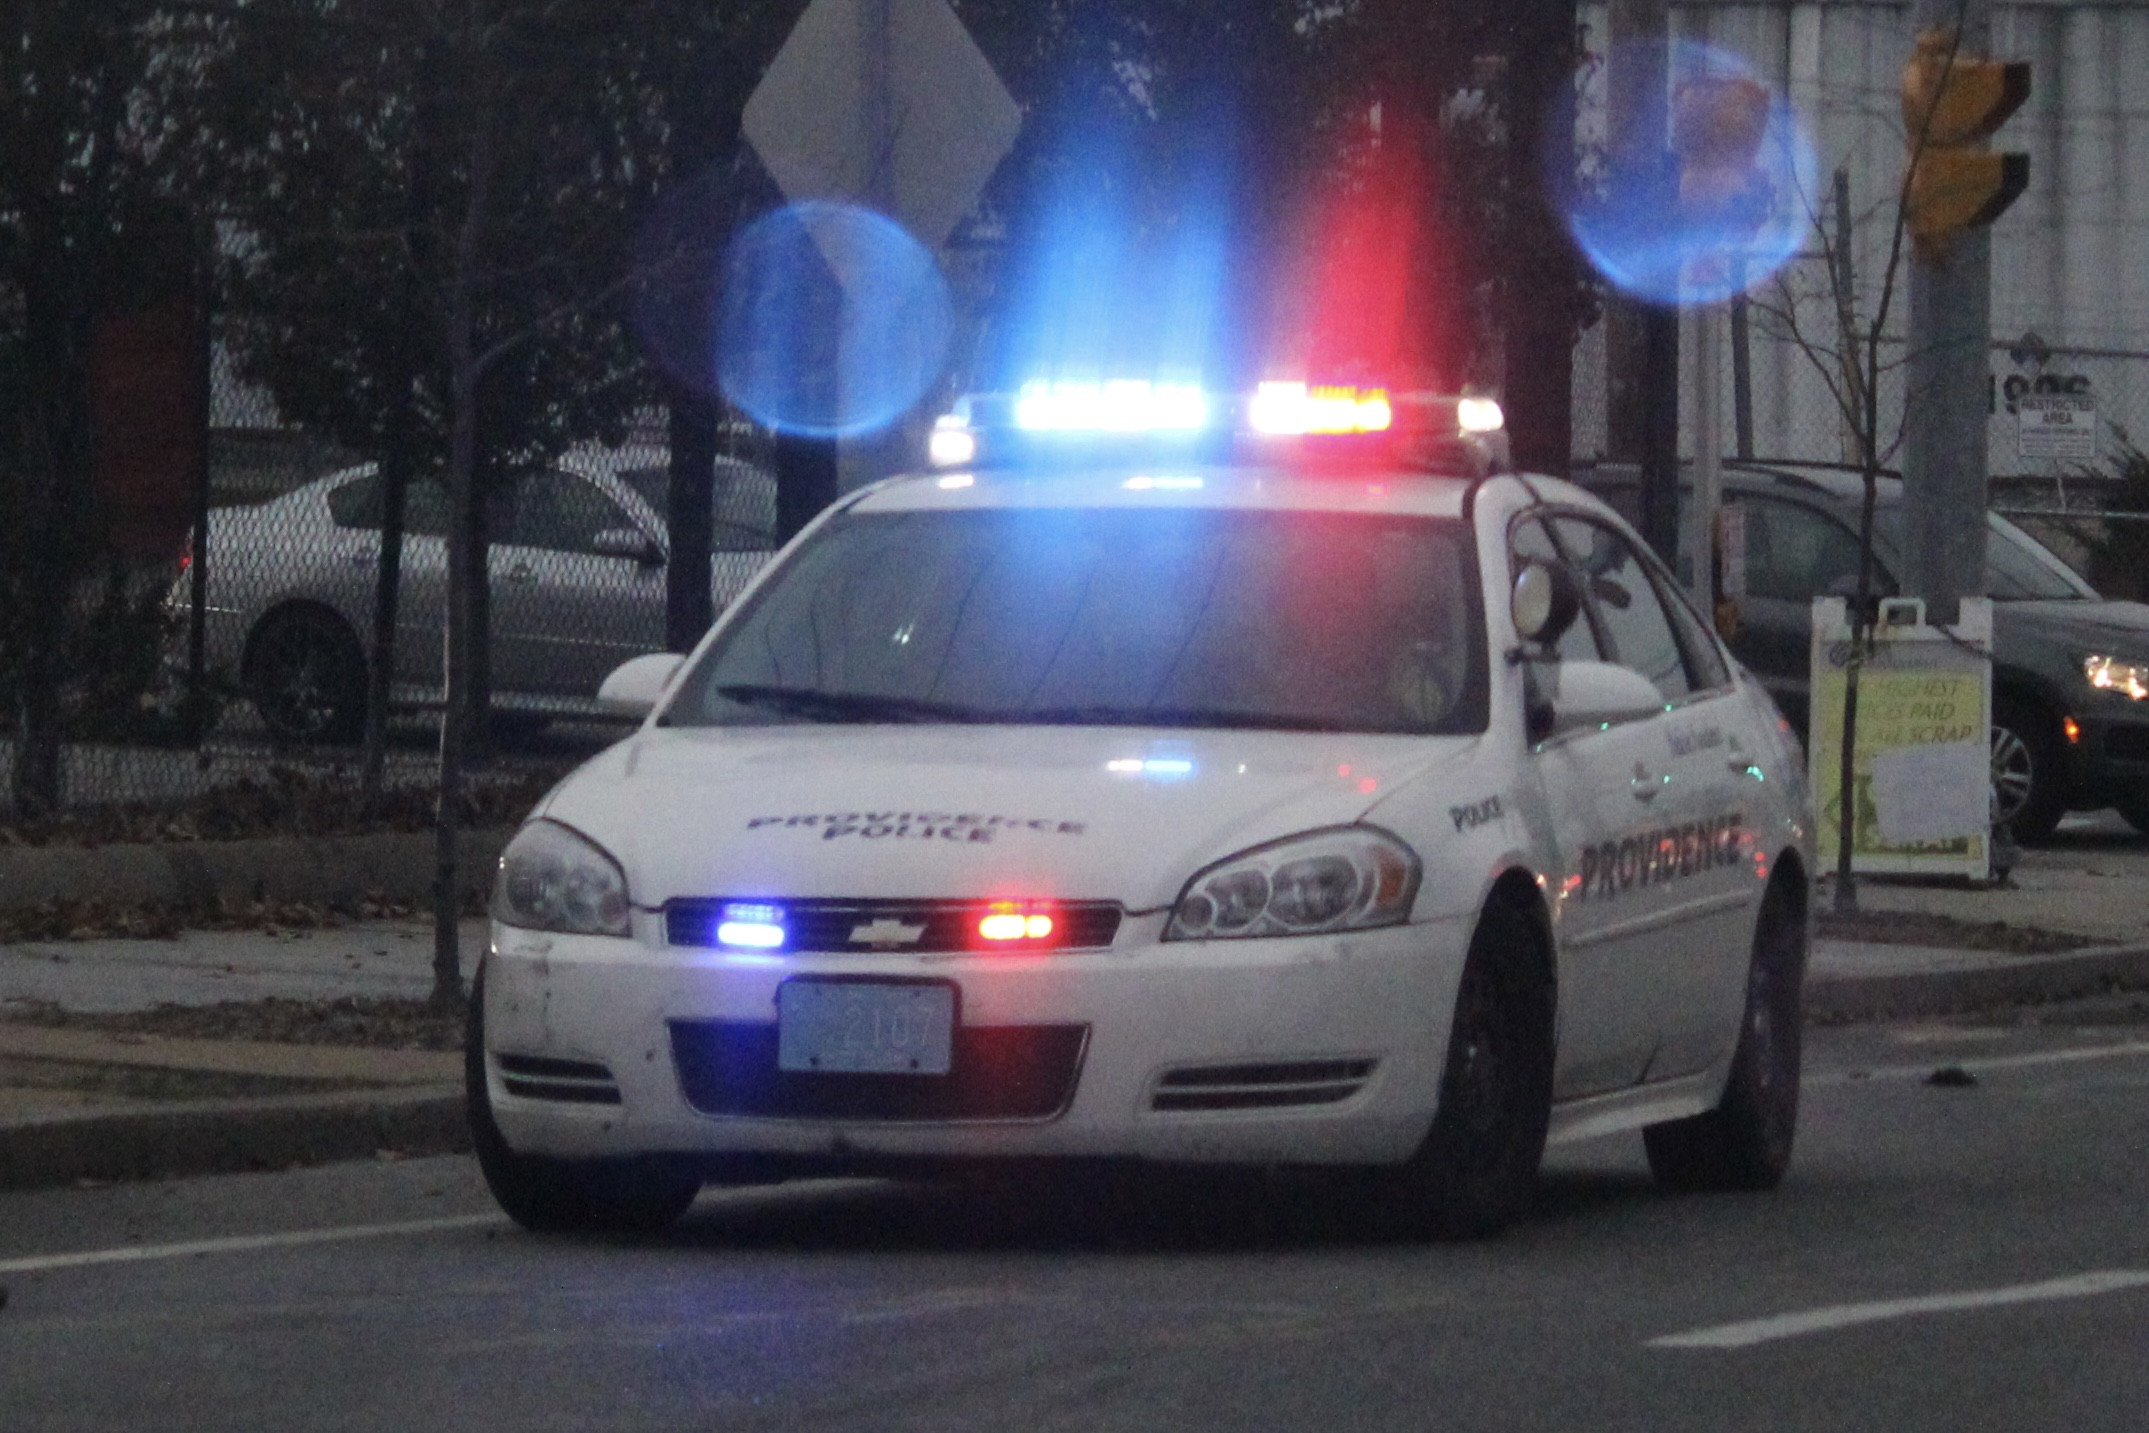 A photo  of Providence Police
            Cruiser 2107, a 2006-2013 Chevrolet Impala             taken by @riemergencyvehicles